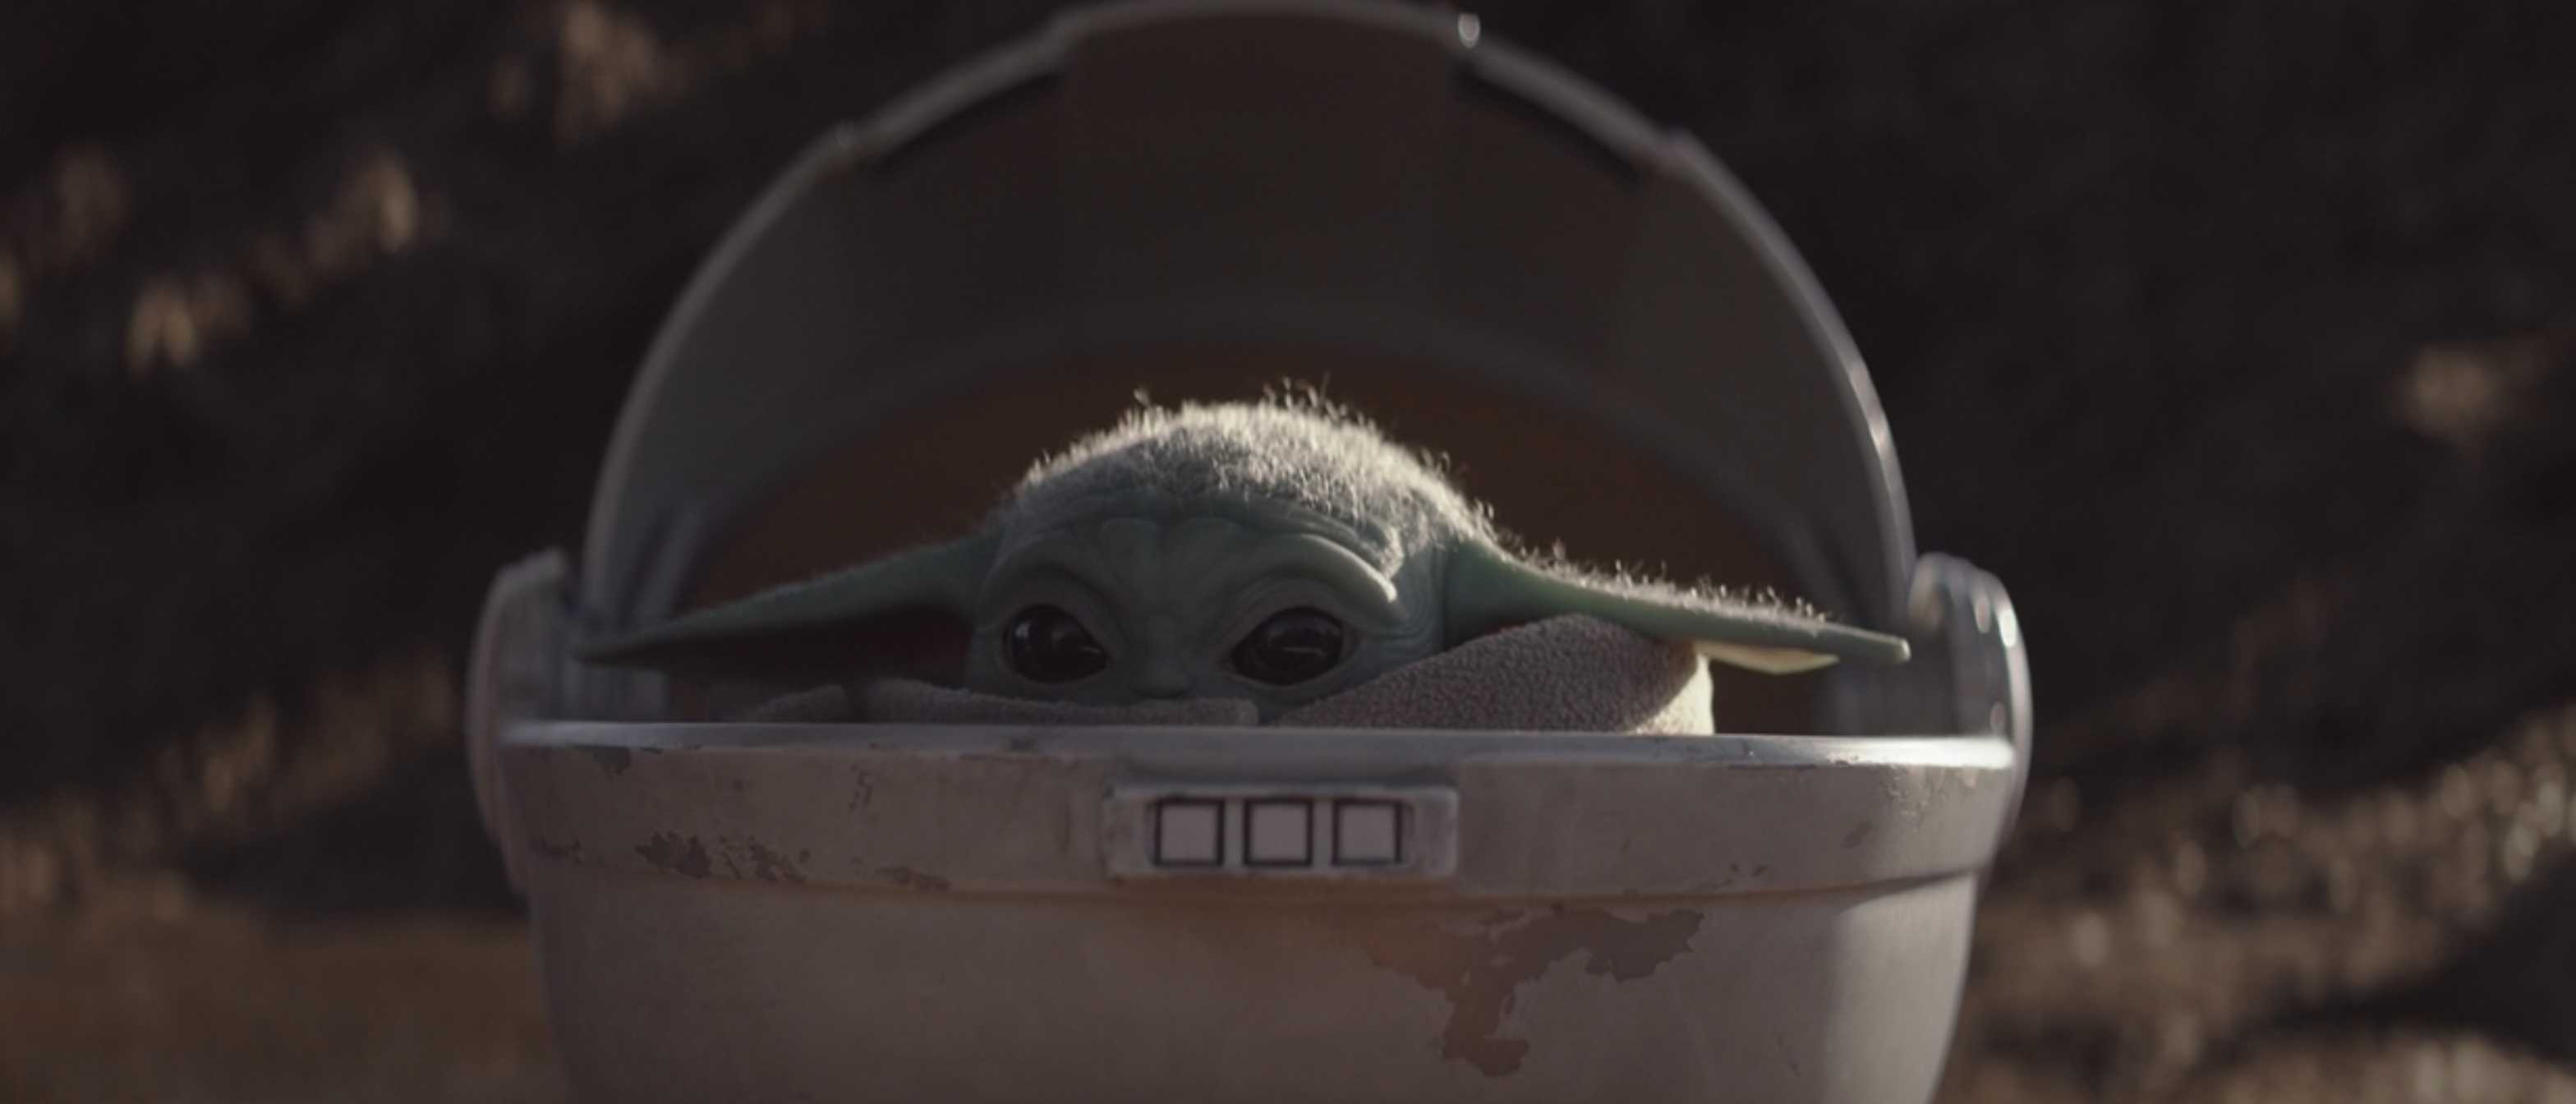 Baby Yoda in The Mandalorian, in his floating bed